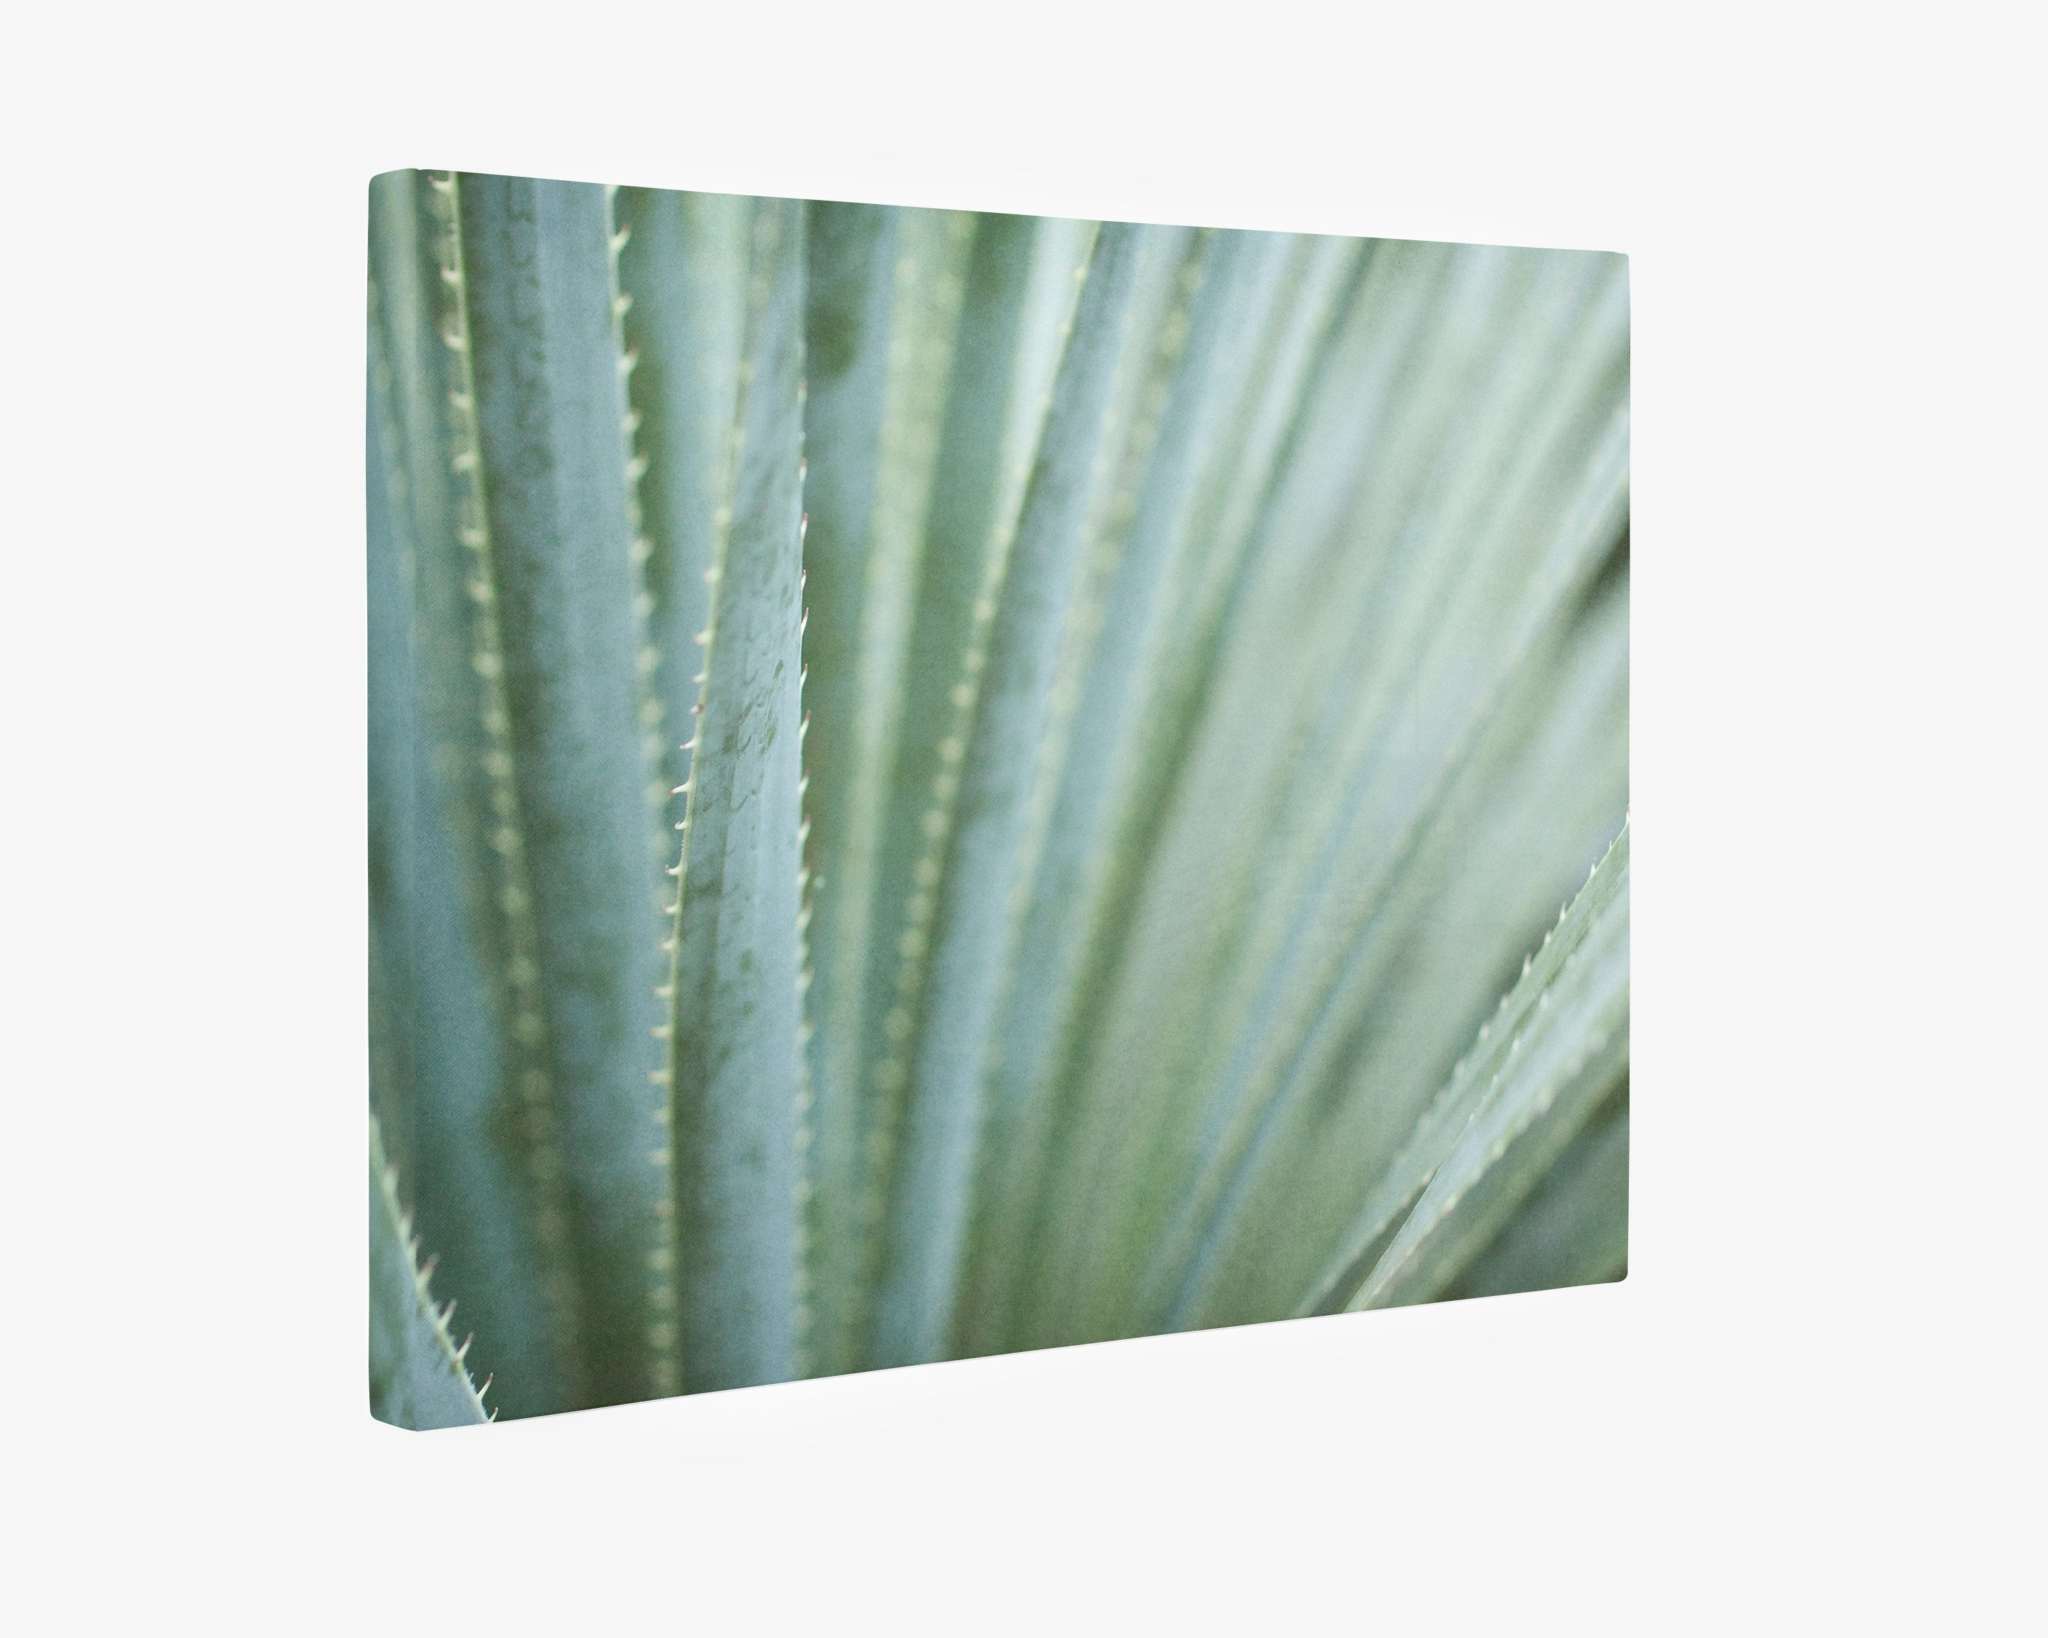 Close-up of a blue agave plant showing detailed texture and sharp spines, with a soft focus in the background, printed on Offley Green's Abstract Green Botanical Canvas Wall Art, 'Strands and Spikes'.